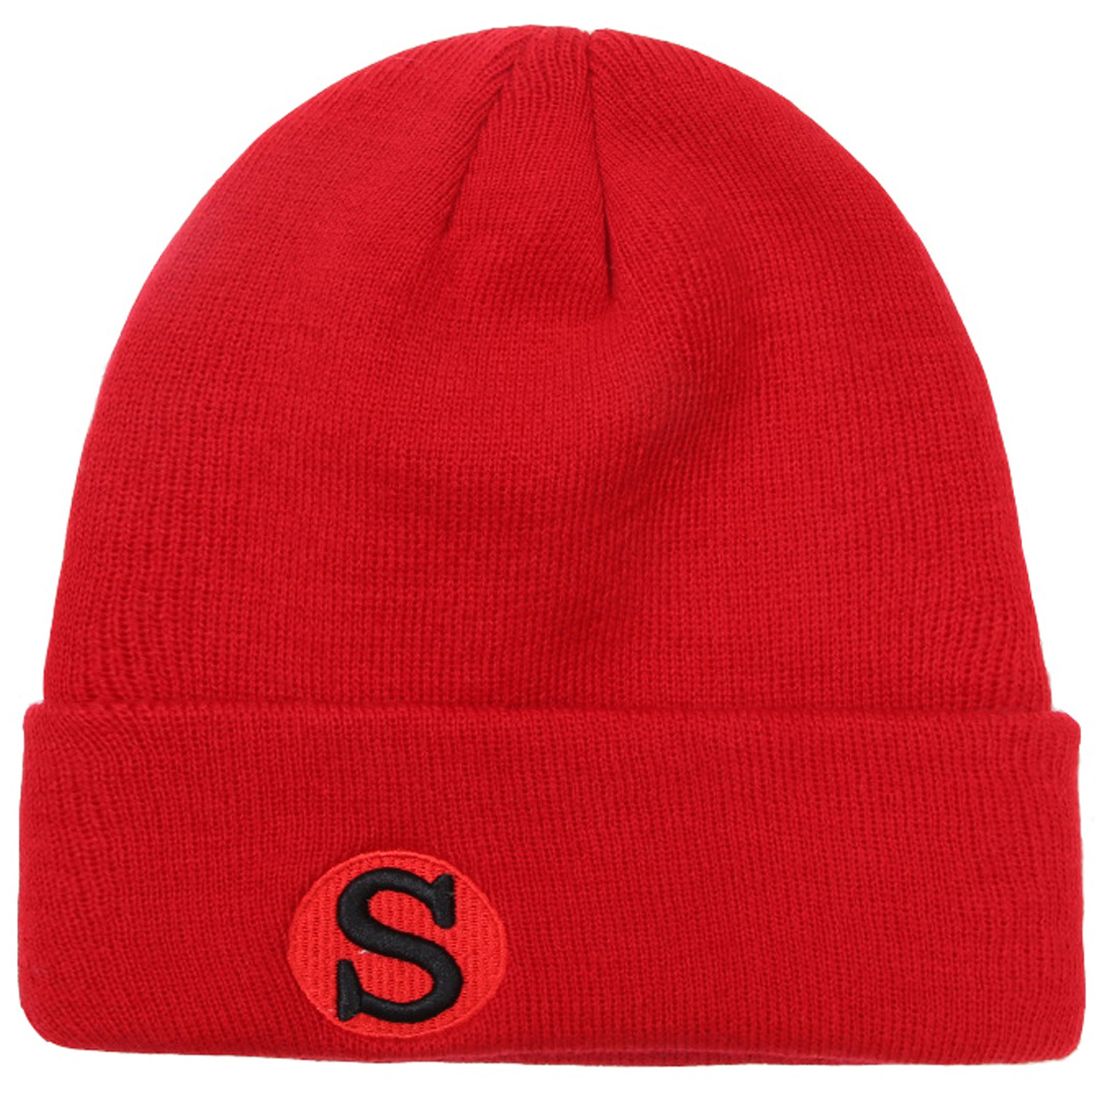 Embroidered Promotional Knit Beanie w/ Cuff